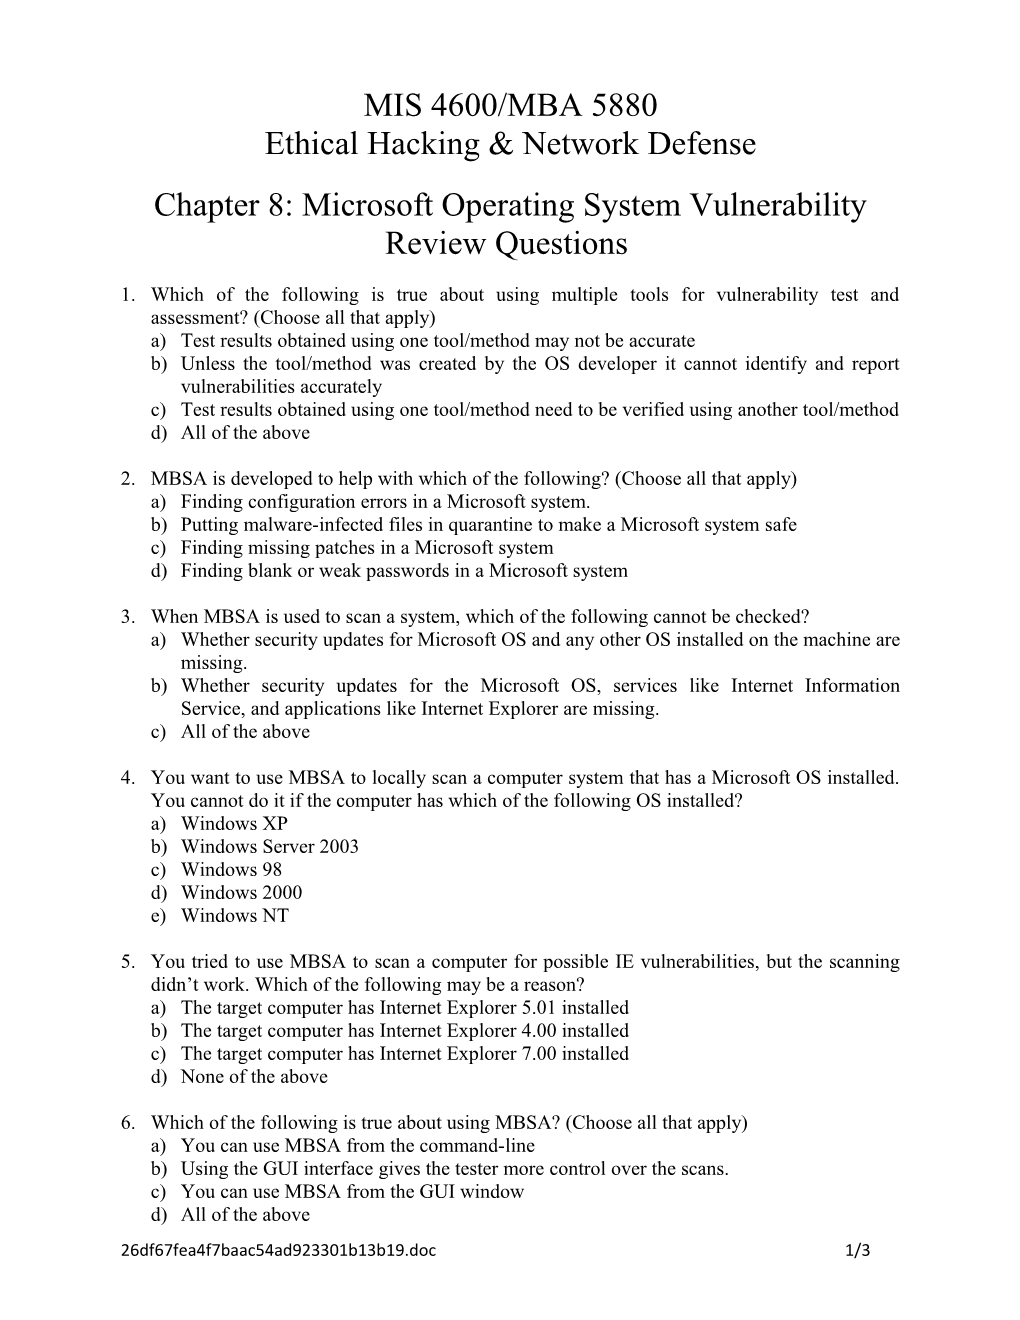 Chapter 8: Microsoft Operating System Vulnerability